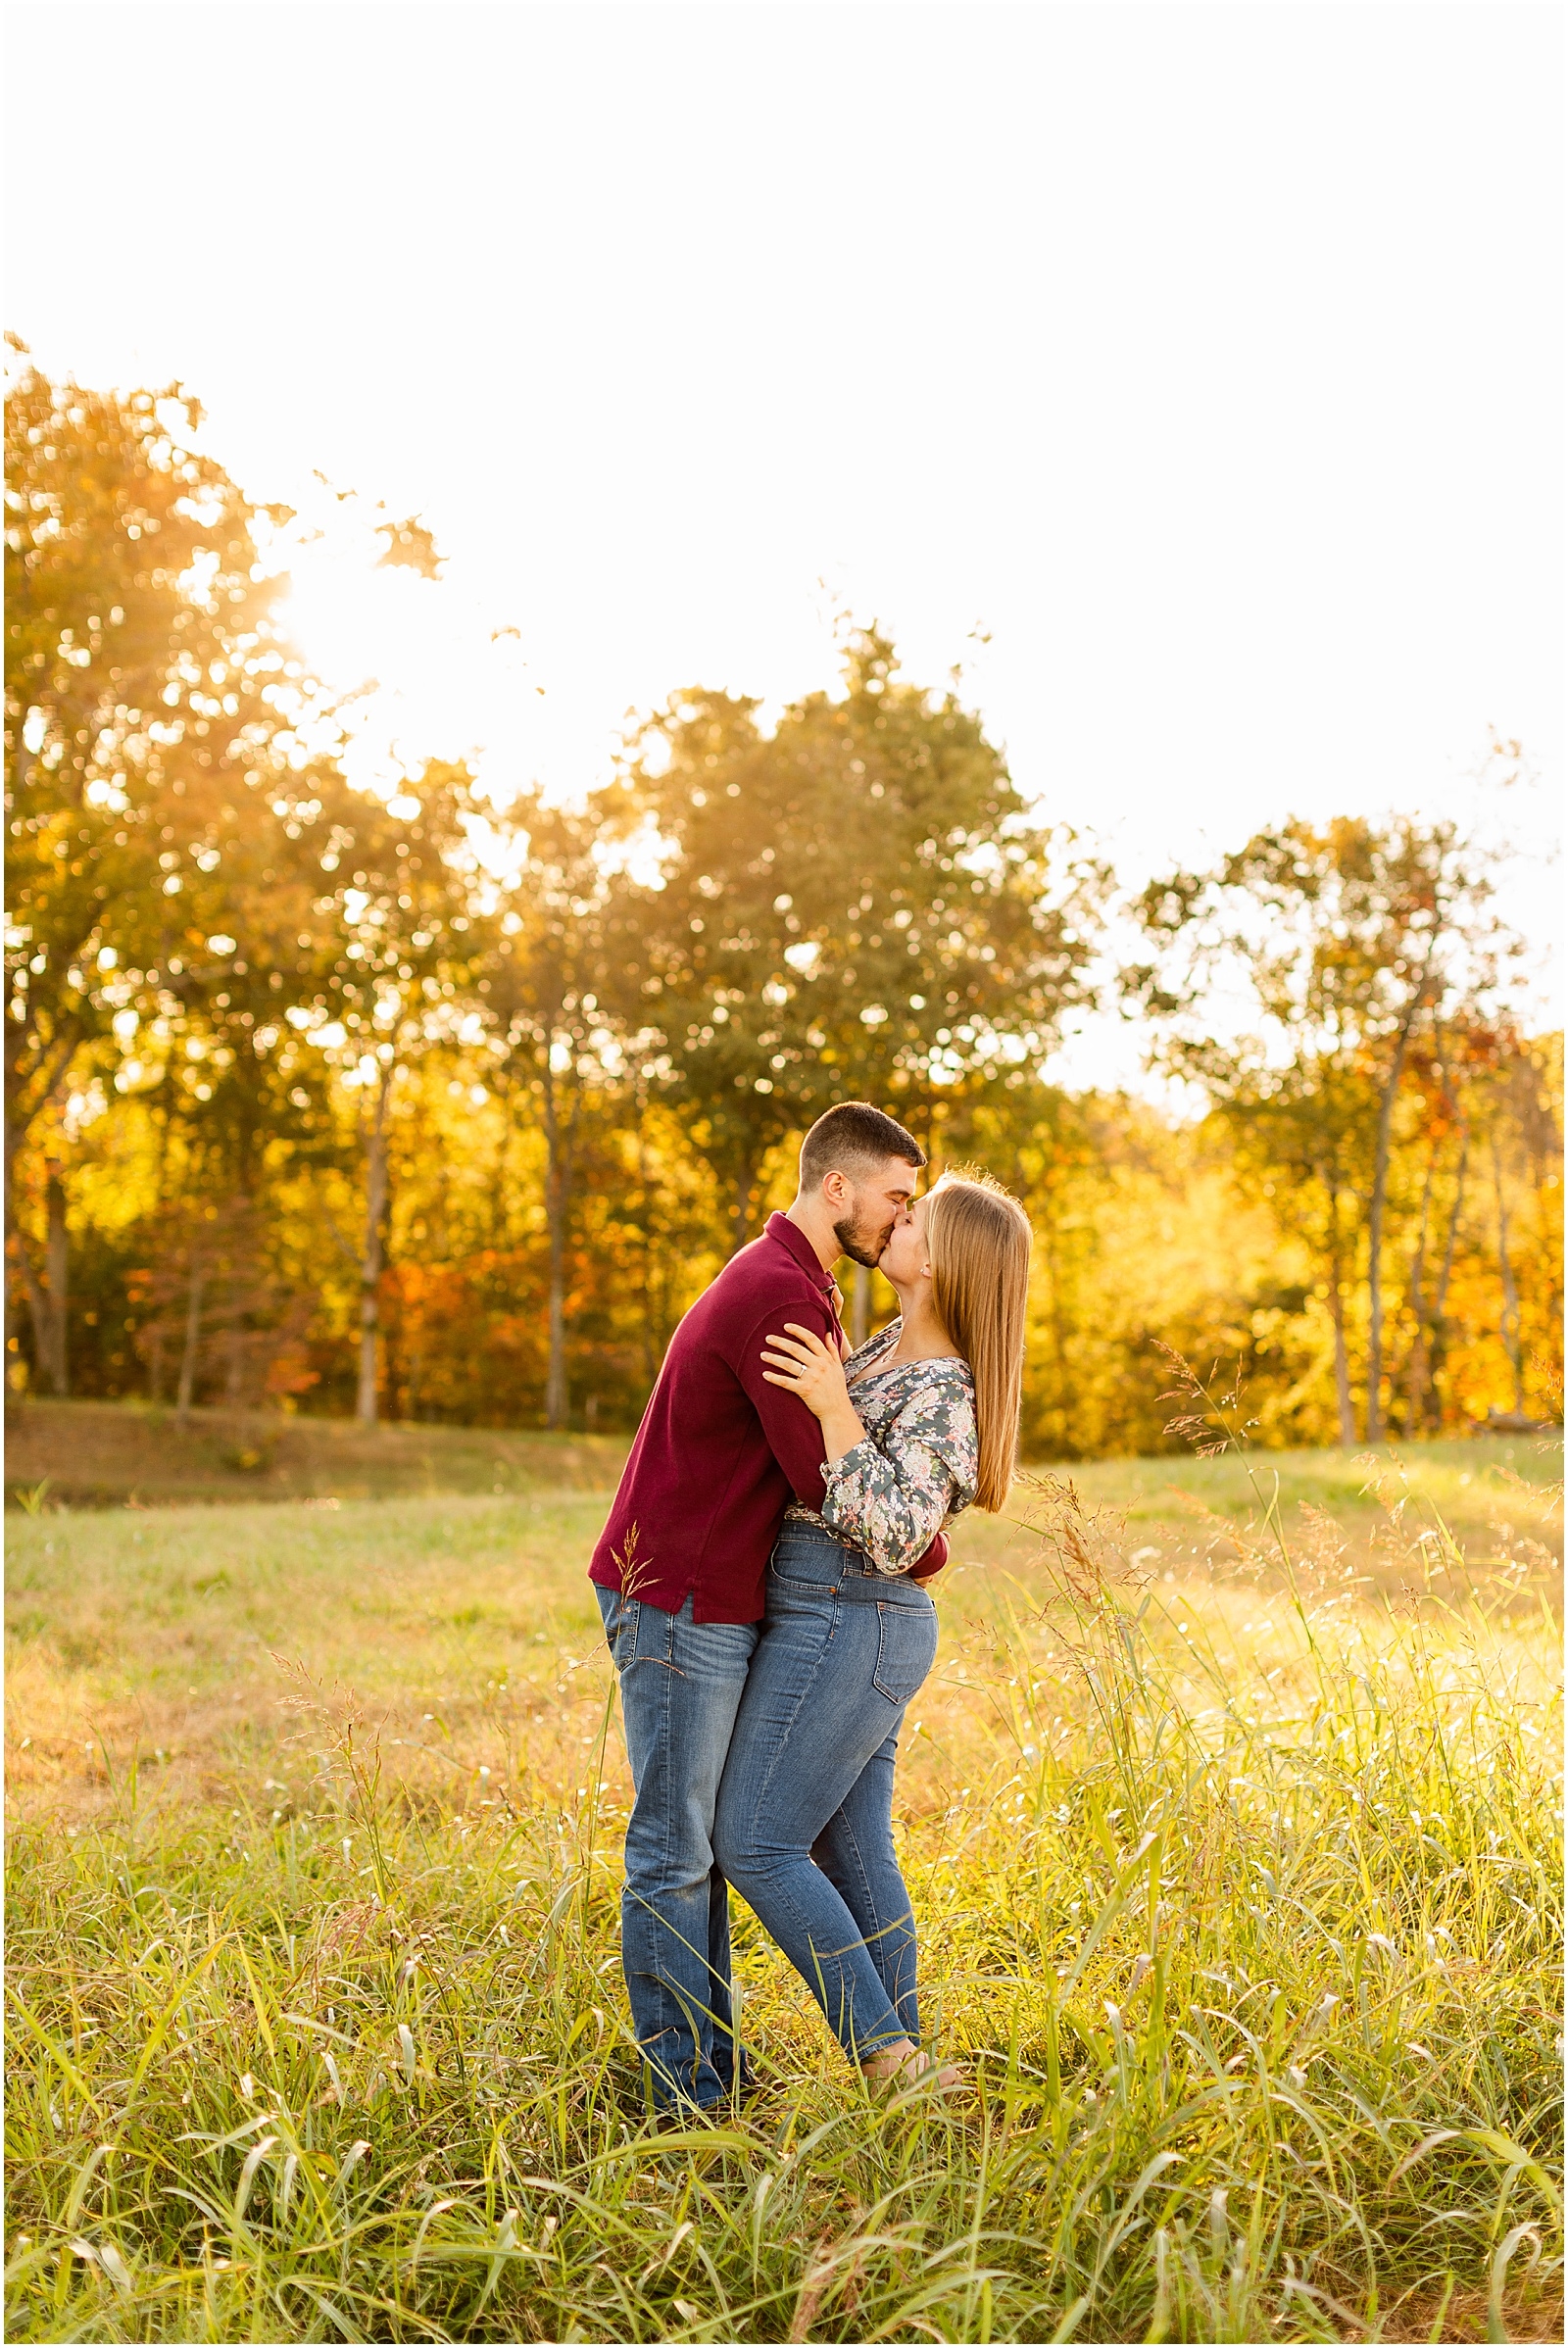 Claire and Kane's Riverside Engagement Session Bret and Brandie Photography | Evansville Indiana Wedding Photographers_0014.jpg